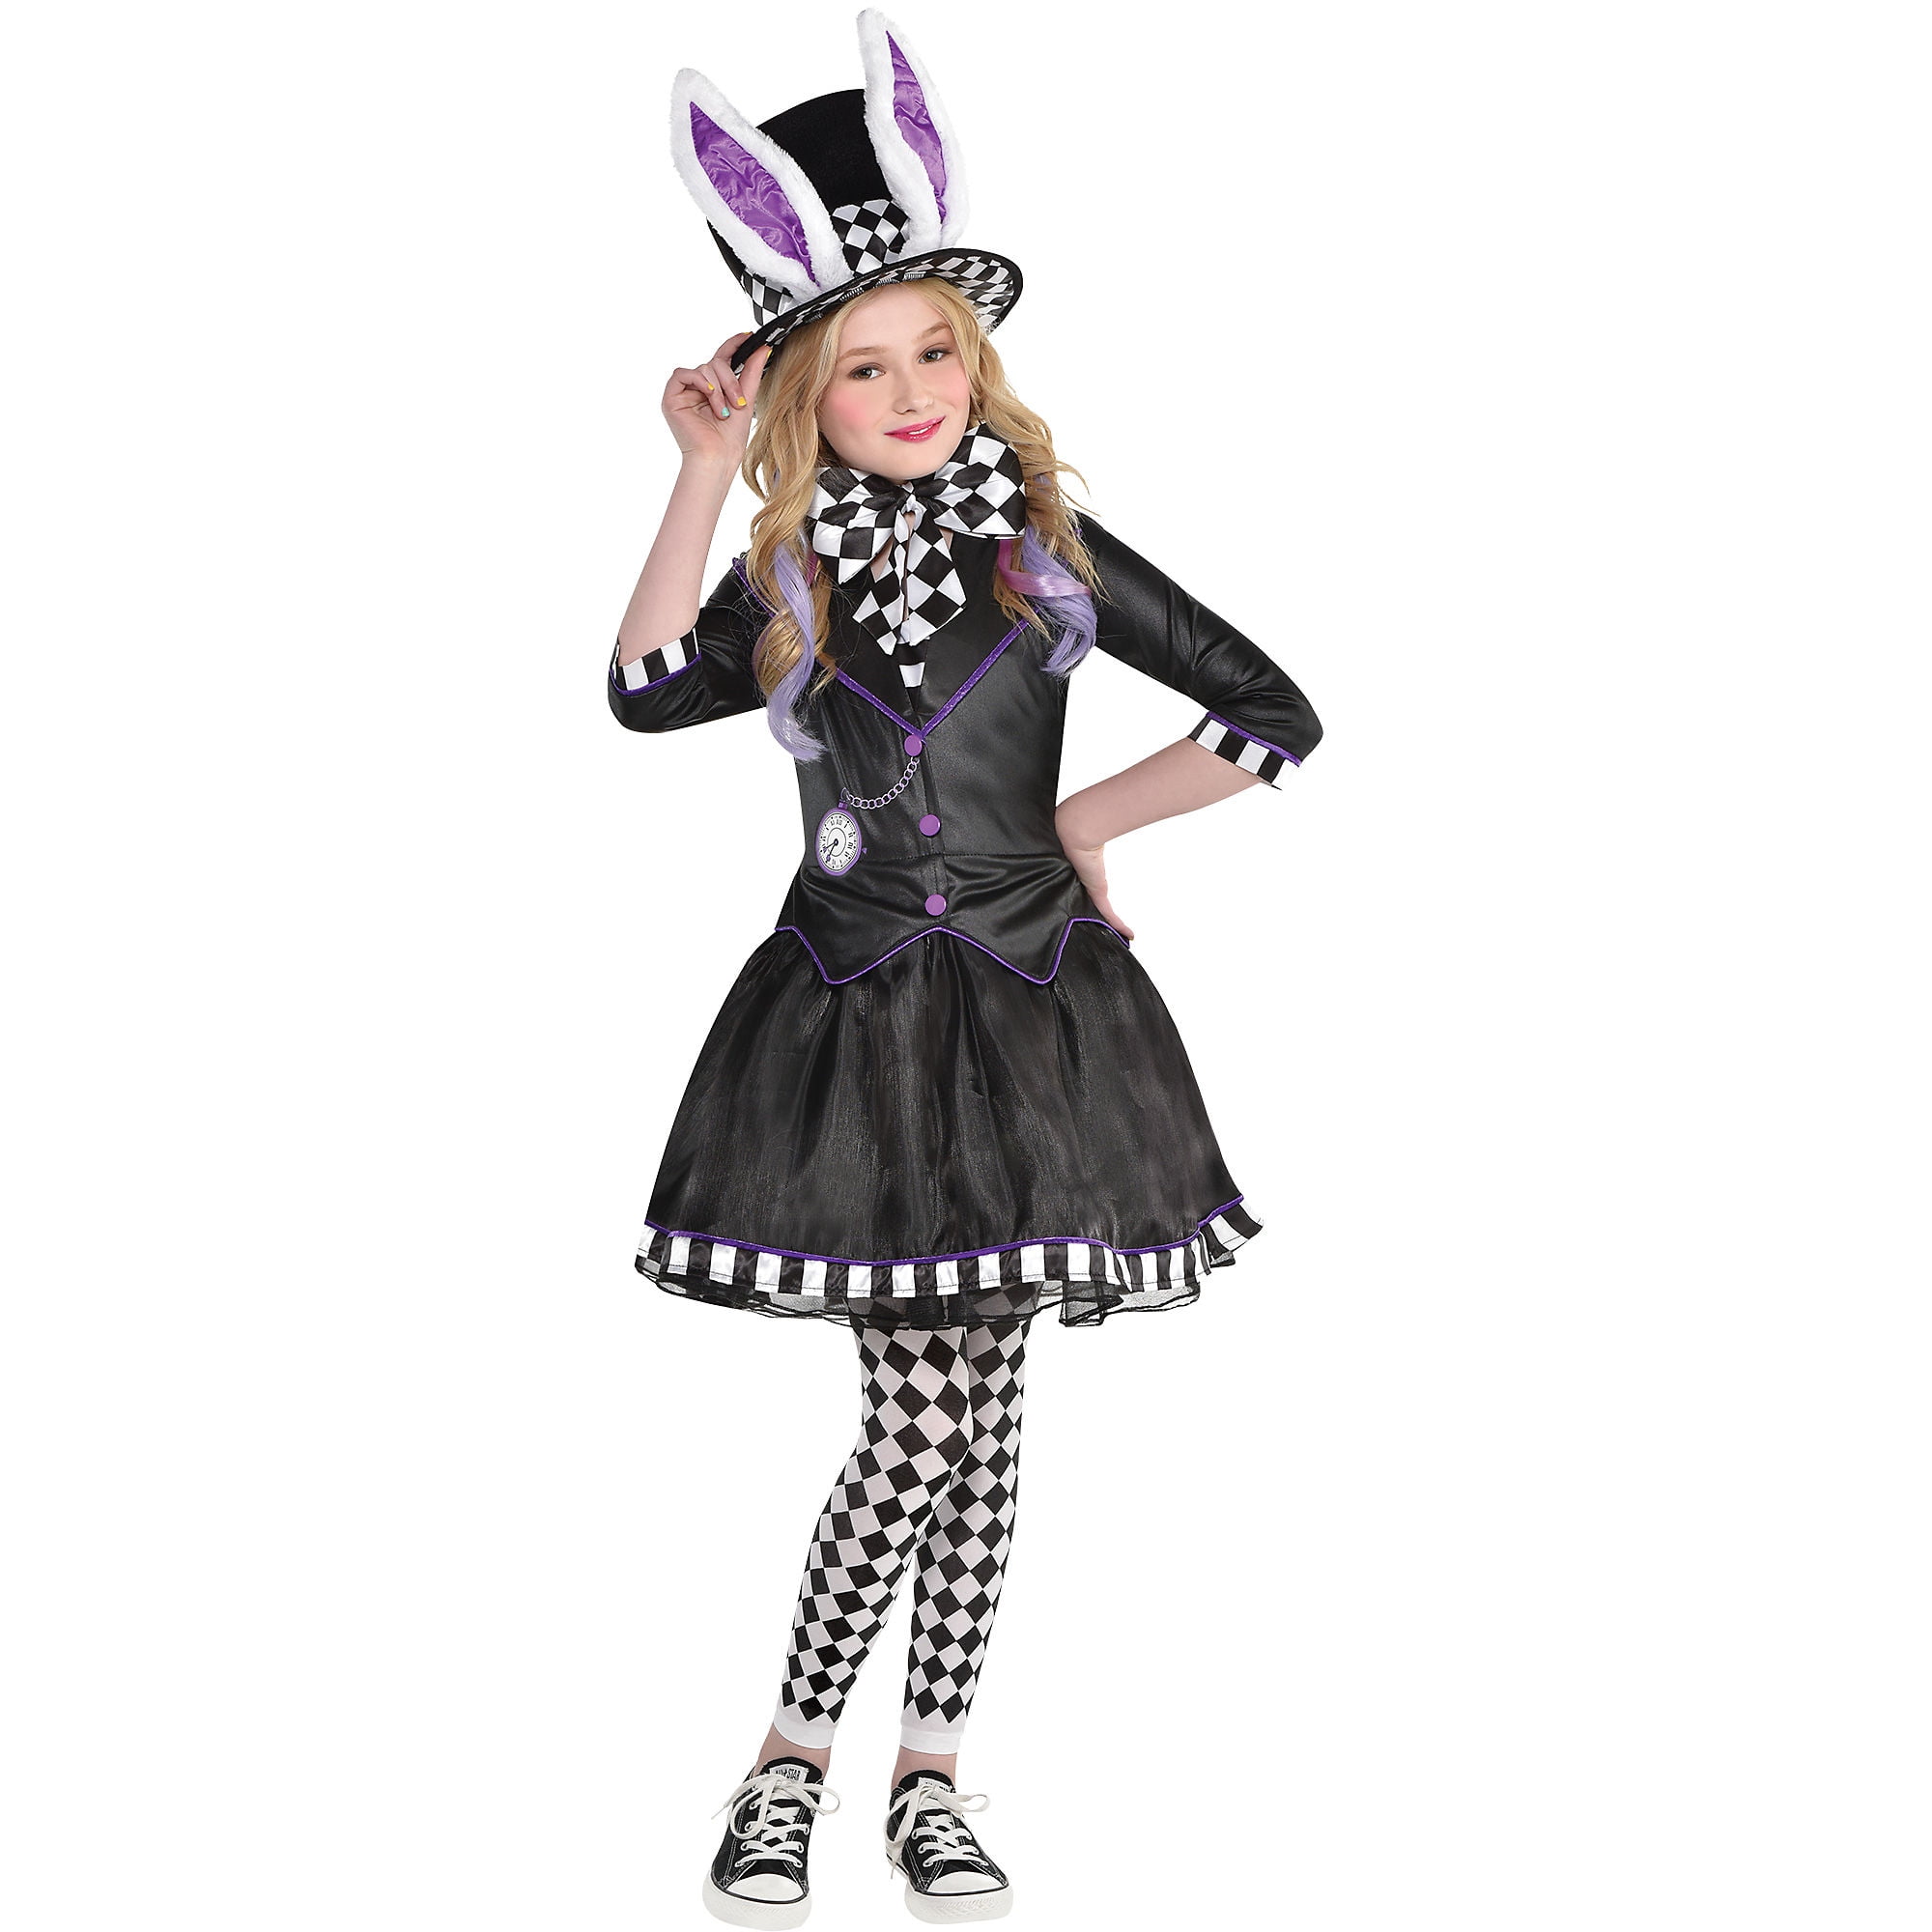 Party City Dark Mad Hatter Costume for Children, Includes a Dress with  Jacket, Tights, a Bow Tie, and a Hat - Walmart.com - Walmart.com